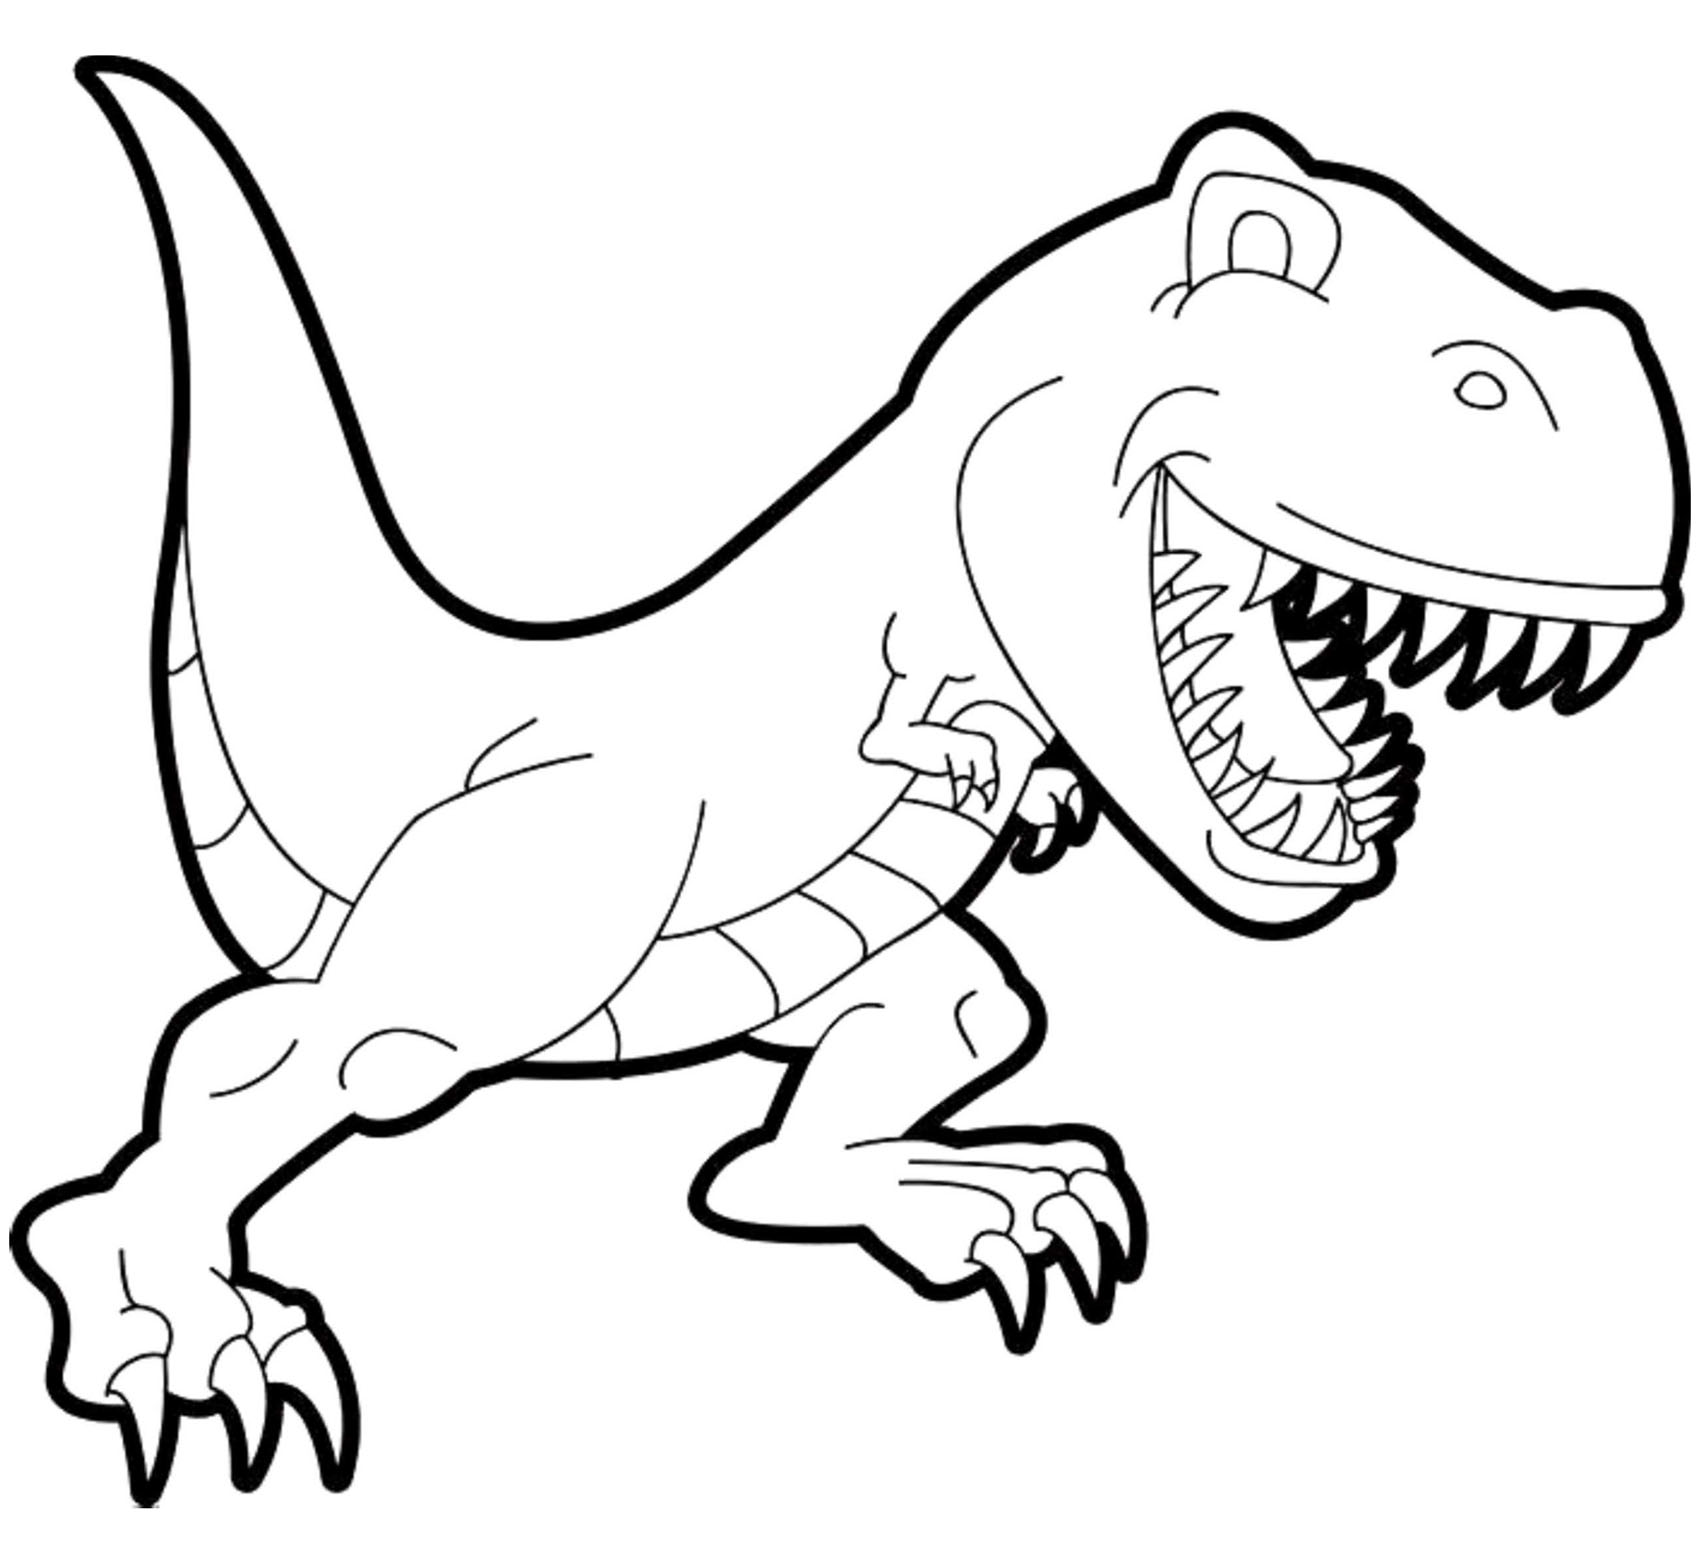 Download Dinosaurs Free To Color For Kids Tyrannosaur Rex Cartoon Dinosaurs Kids Coloring Pages